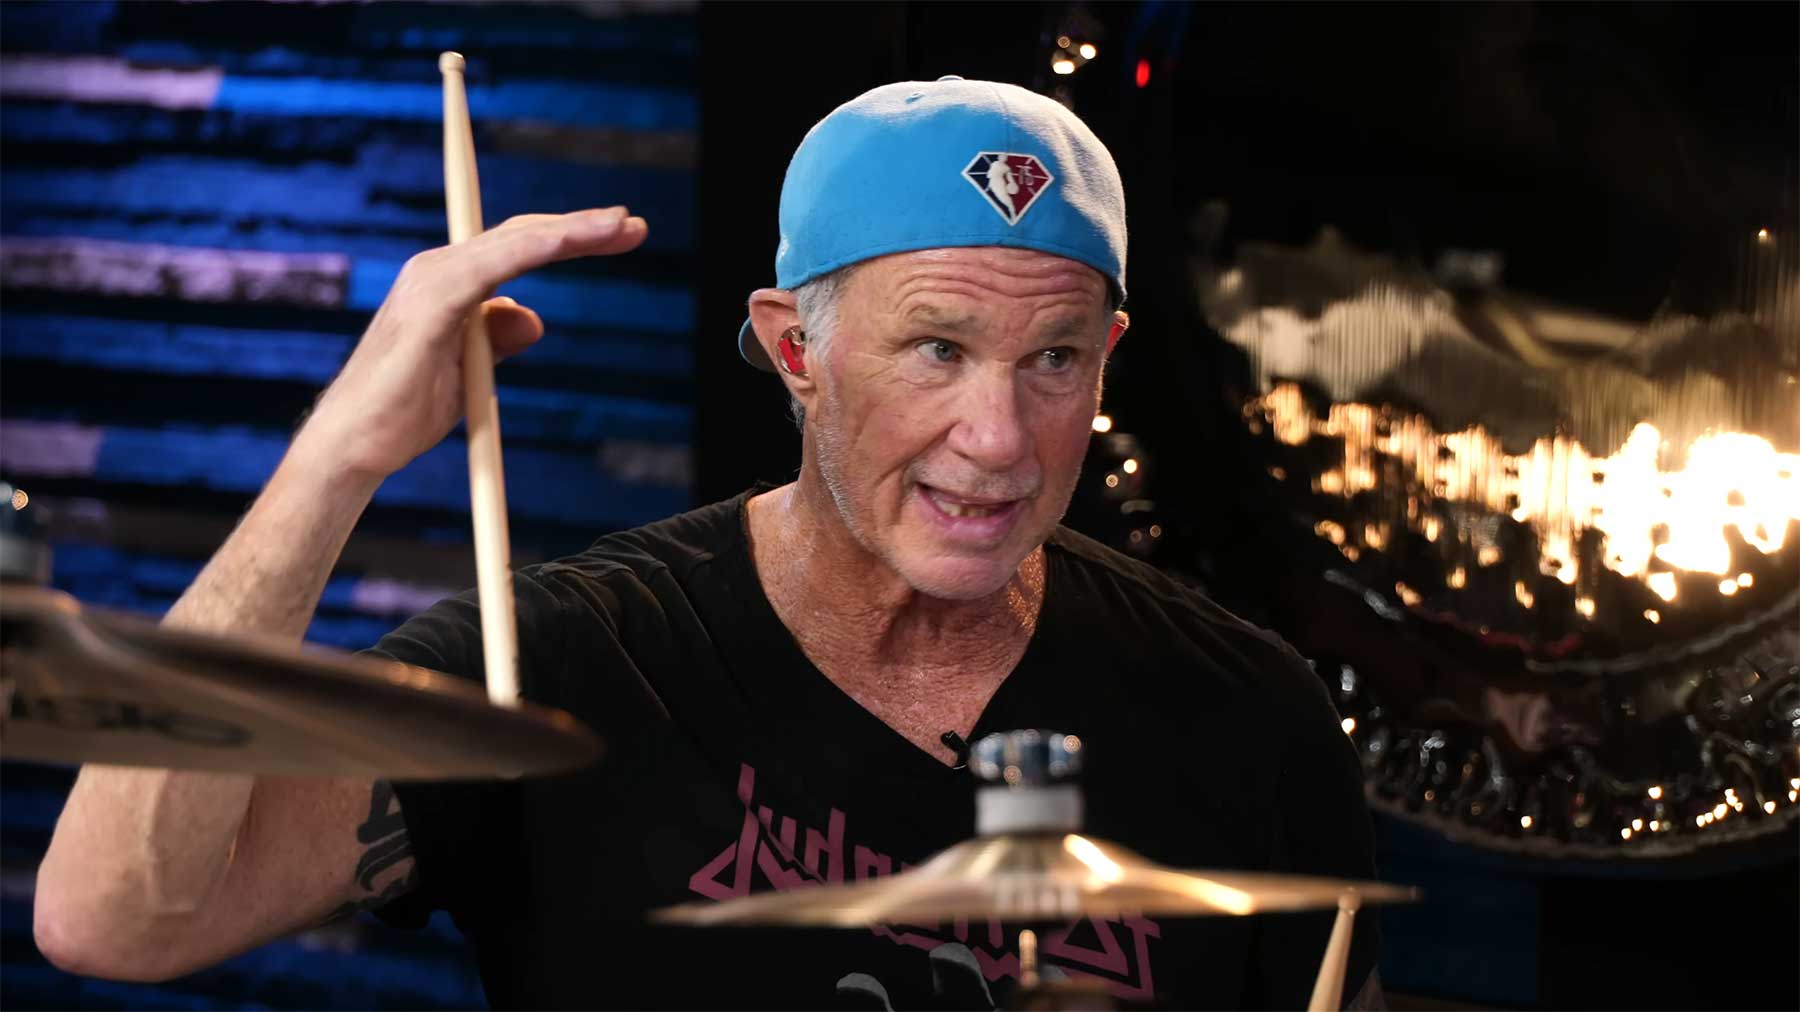 Red-Hot-Chili-Peppers-Schlagzeuger Chad Smith im Drum-Interview red-hot-chili-peppers-schlagzeuger-chad-smith-im-Drum-Interview 